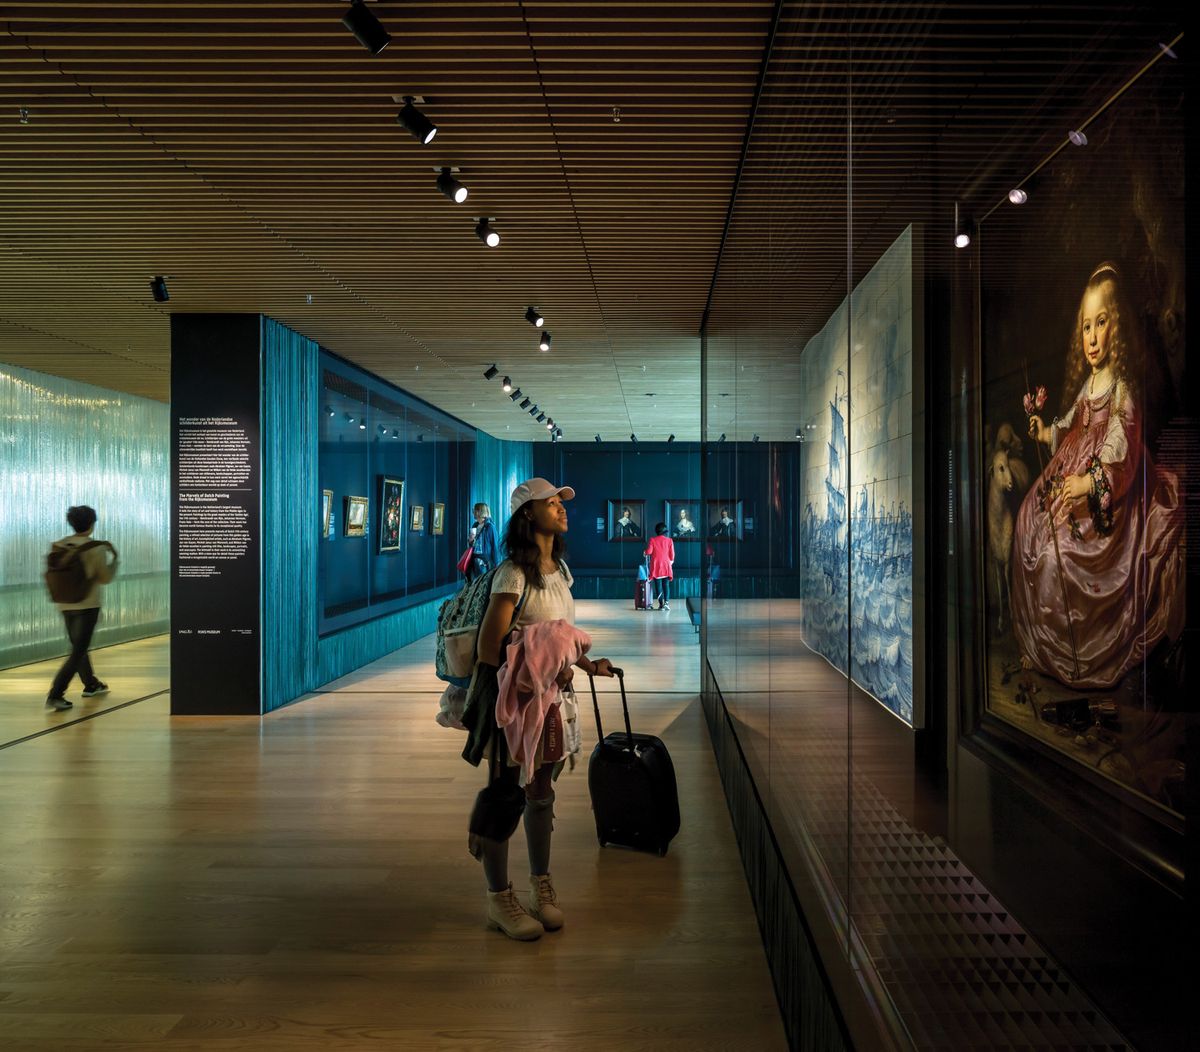 The Rijksmuseum's branch at Amsterdam's Schiphol airport displayed ten Golden Age Dutch paintings before the closure © Thijs Wolzak